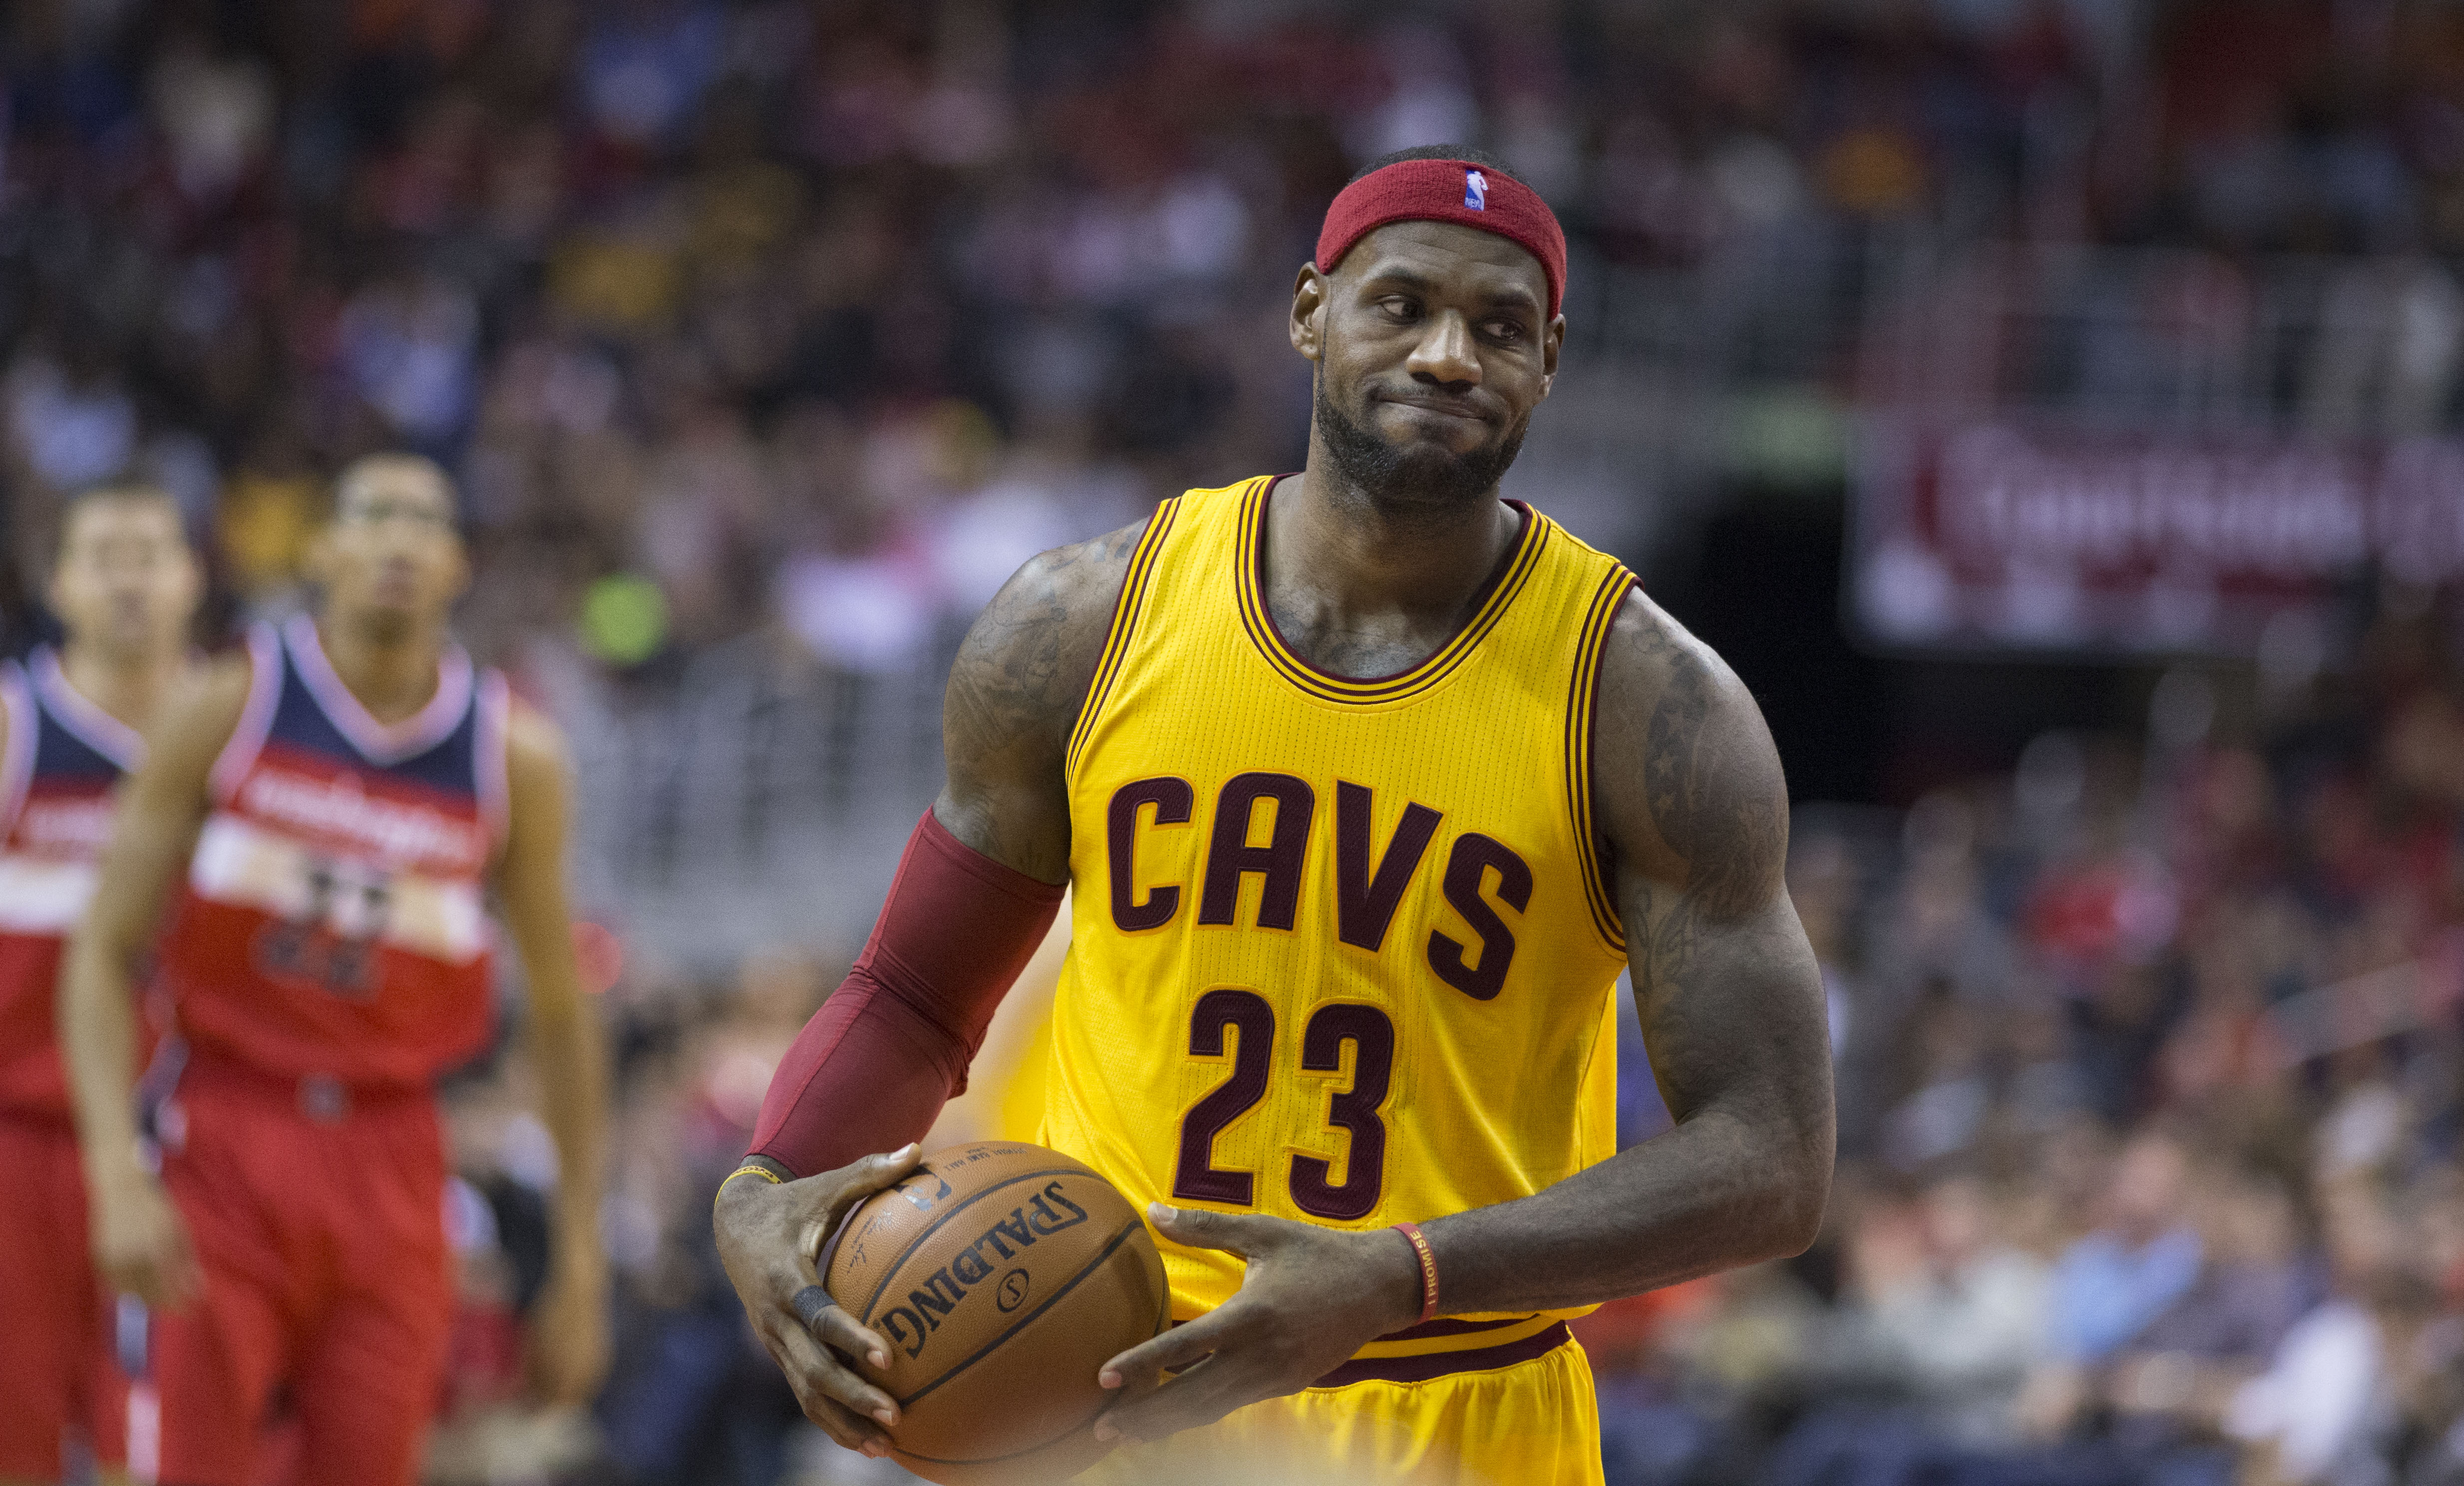 LeBron James: The rise and rise of the NBA's all-time leading scorer